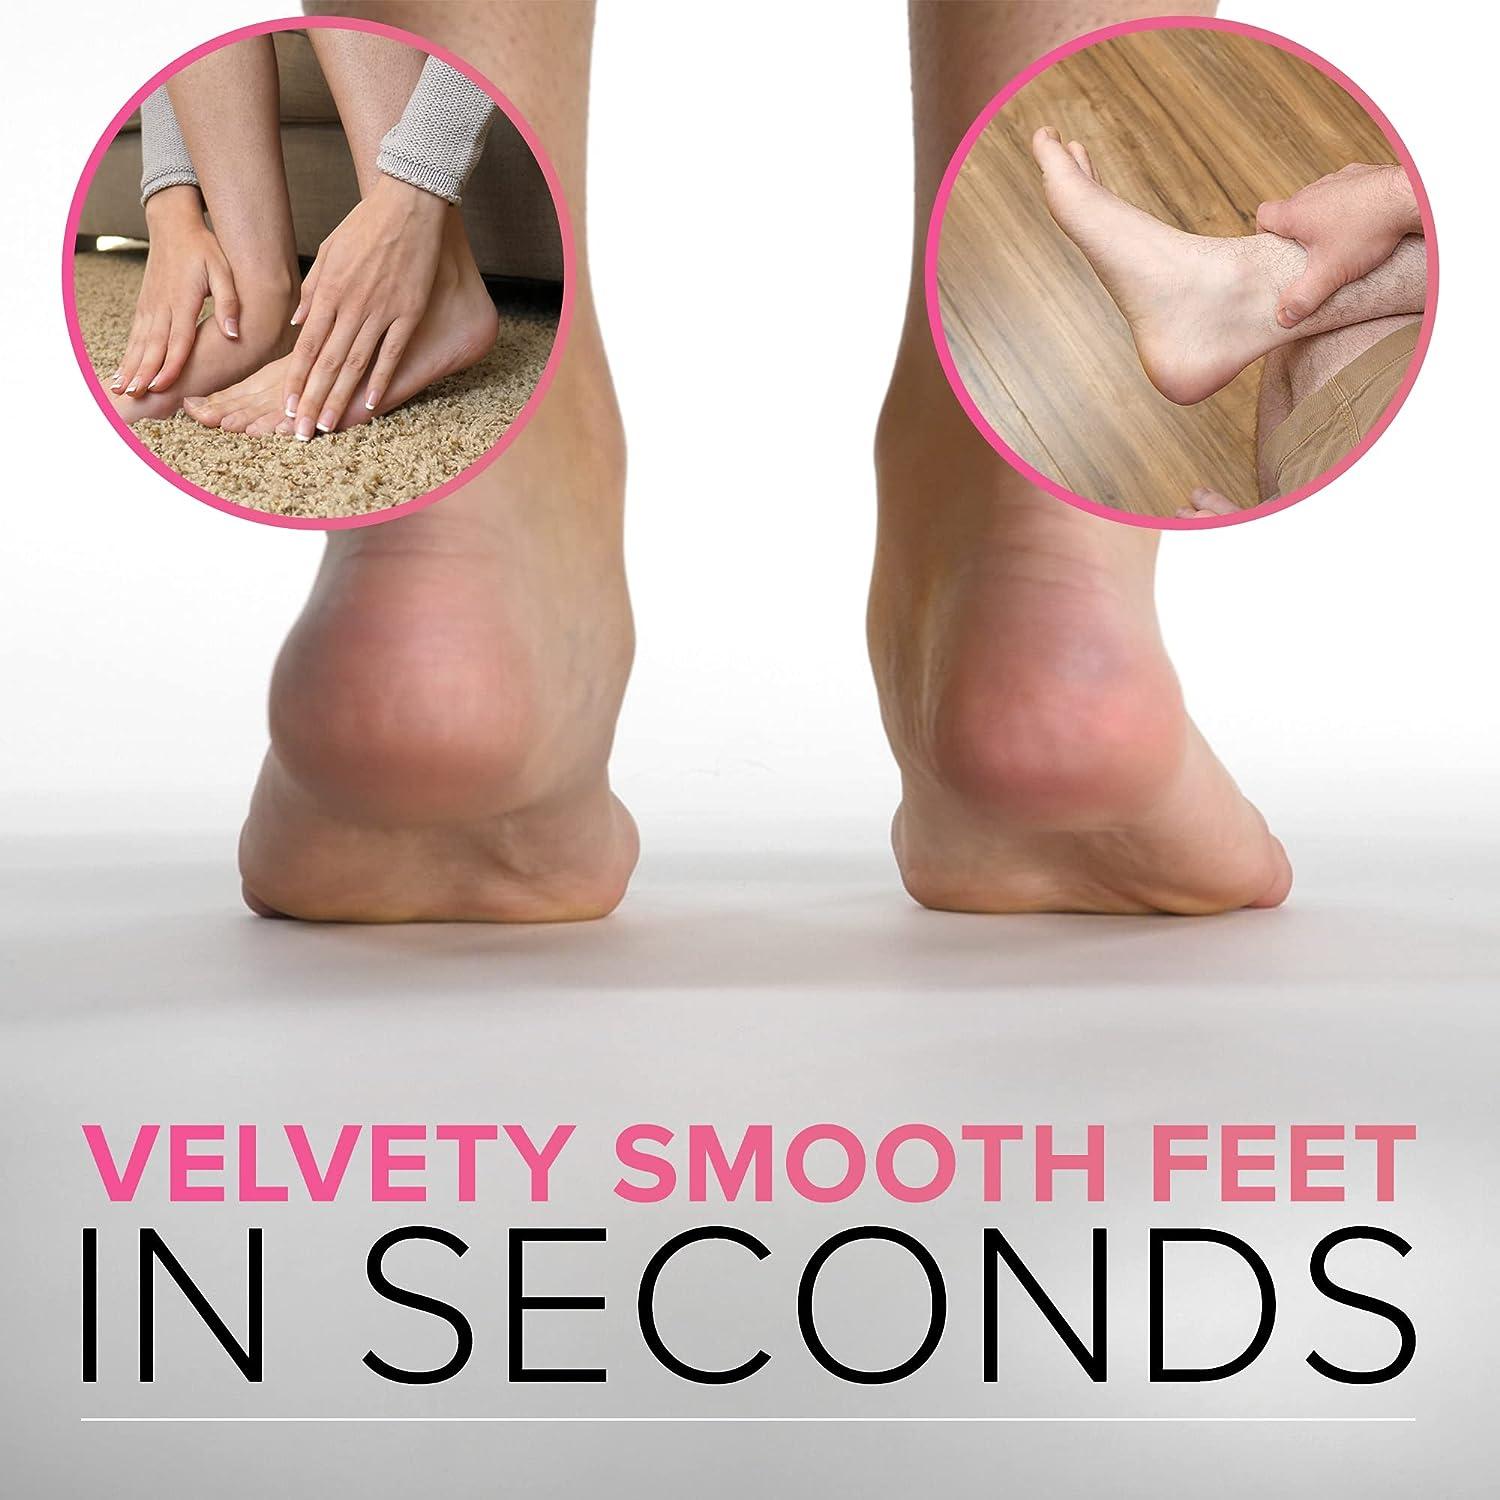 Smooth Feet Tutorial: How To Use The Glamscious 2 In 1 Foot Rasp